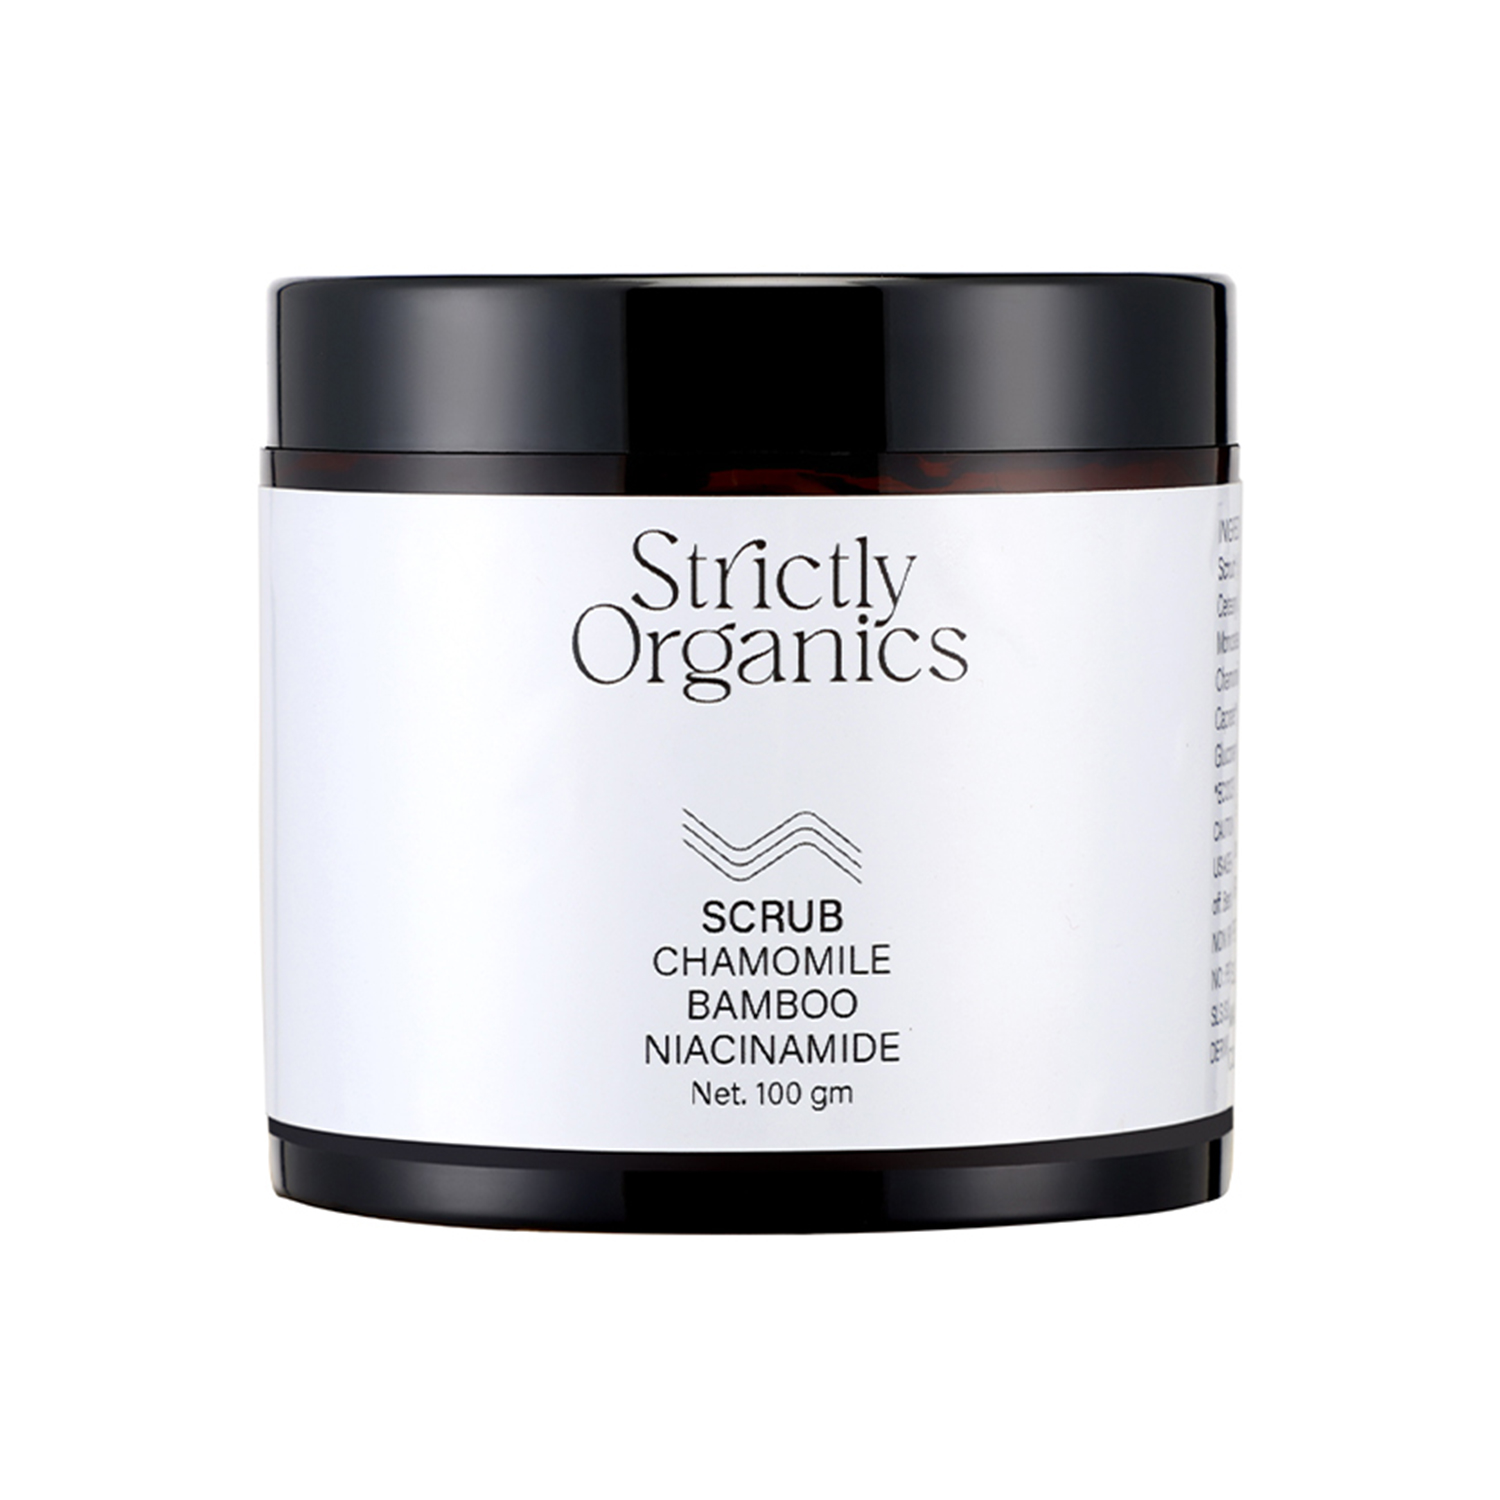 Strictly Organics - Bamboo Face Scrub with Niacinamide, Vitamin C, Chamomile and Green Tea Ext